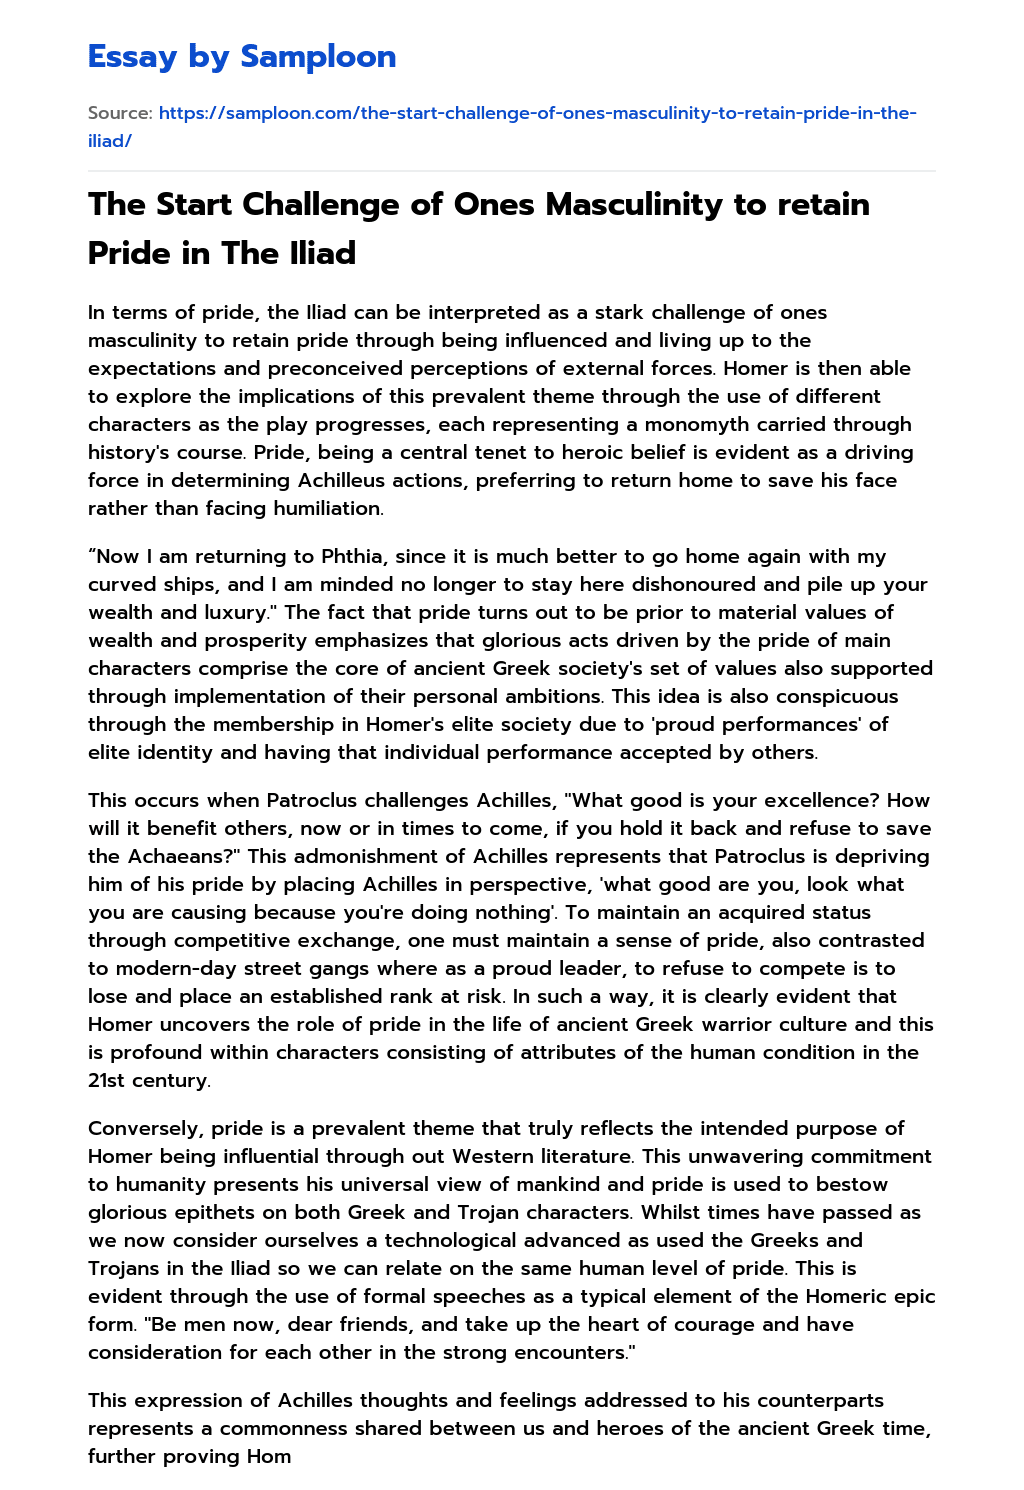 The Start Challenge of Ones Masculinity to retain Pride in The Iliad essay